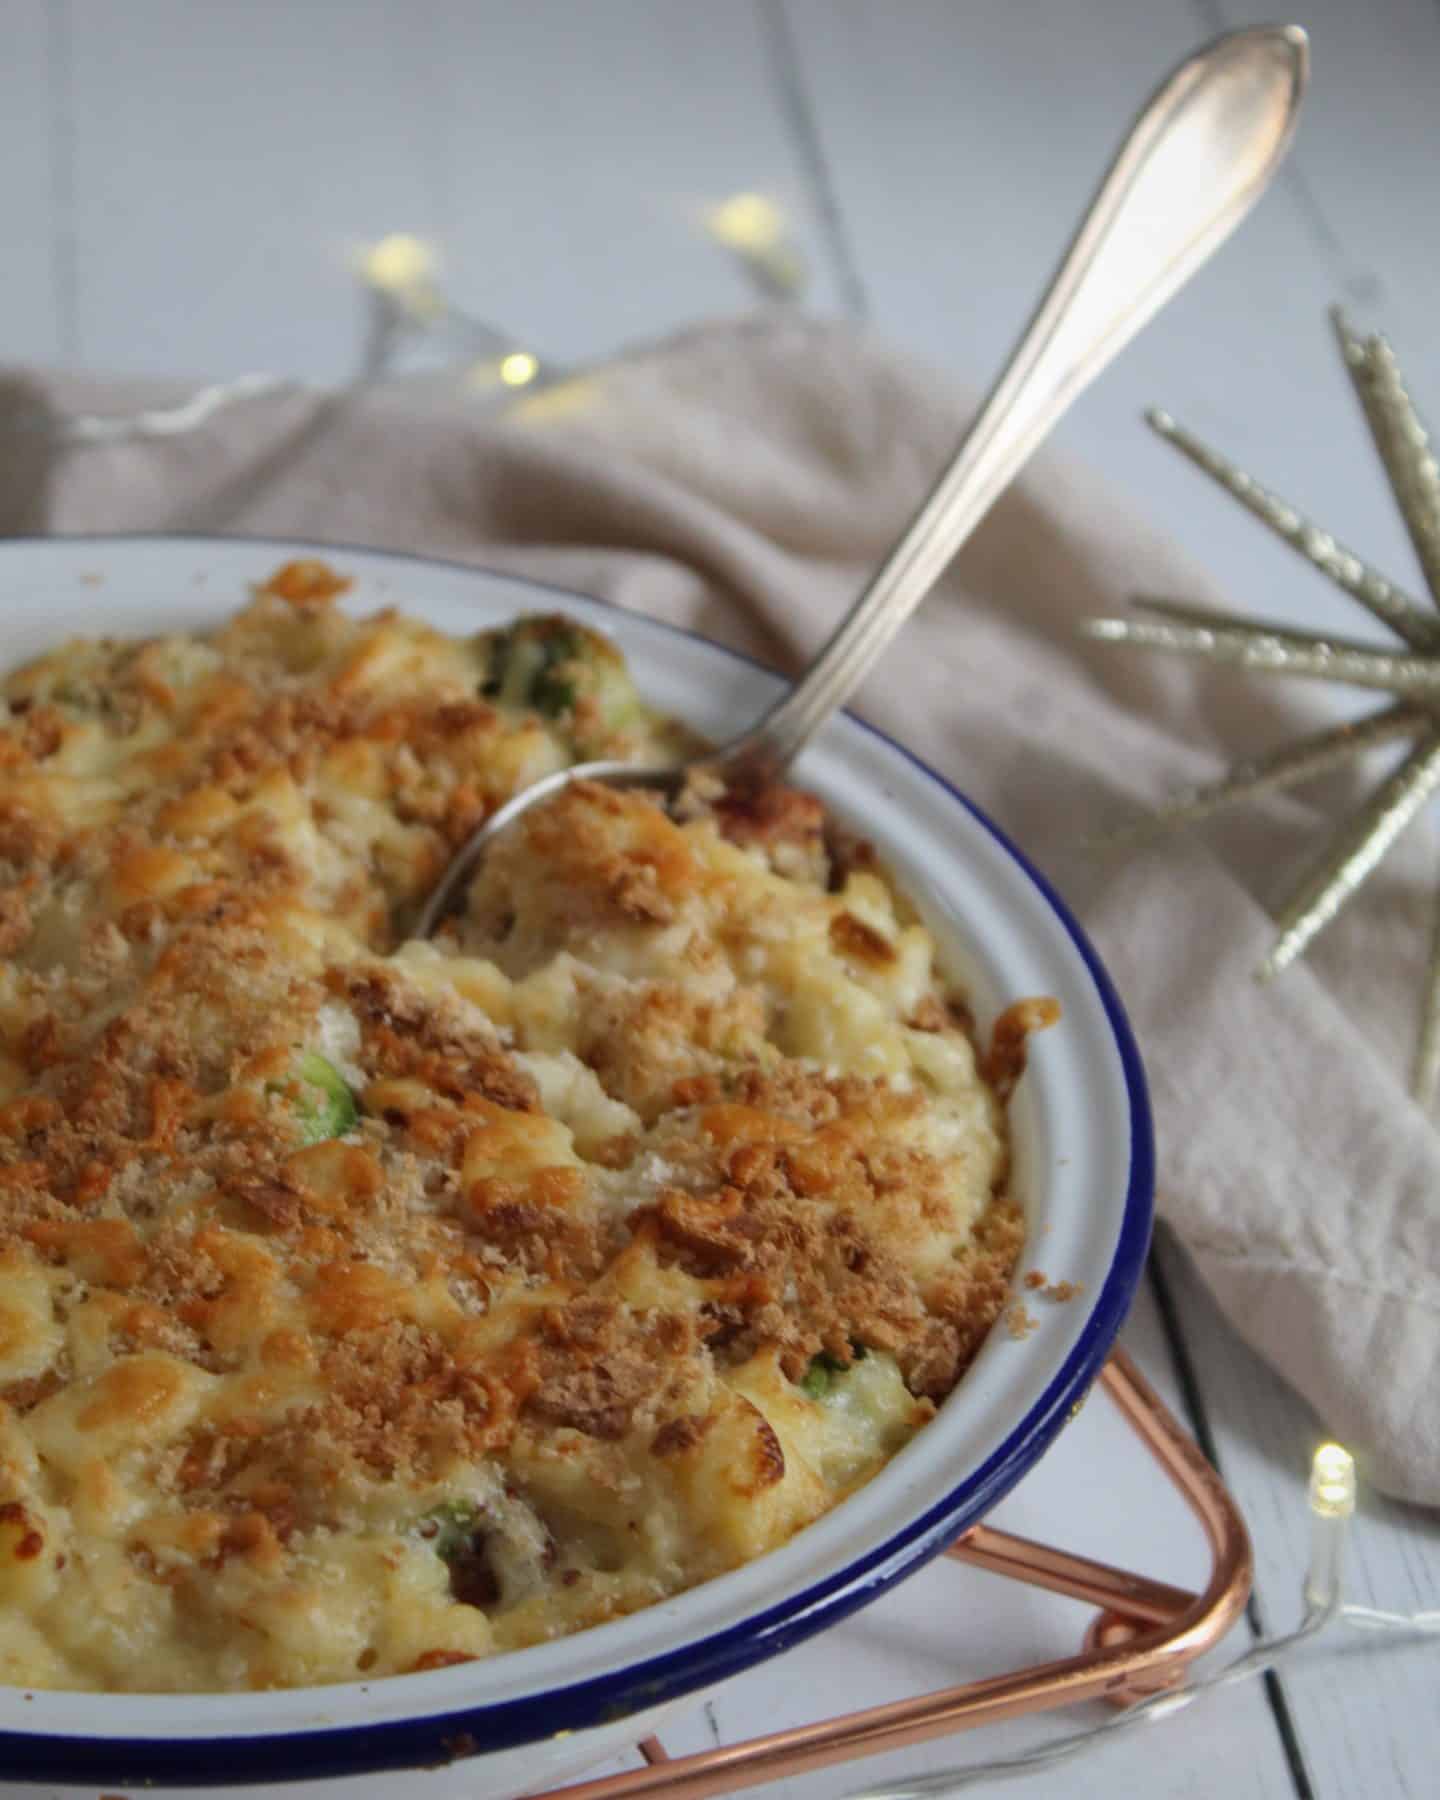 GLUTEN FREE PIGS IN BLANKETS MAC AND CHEESE